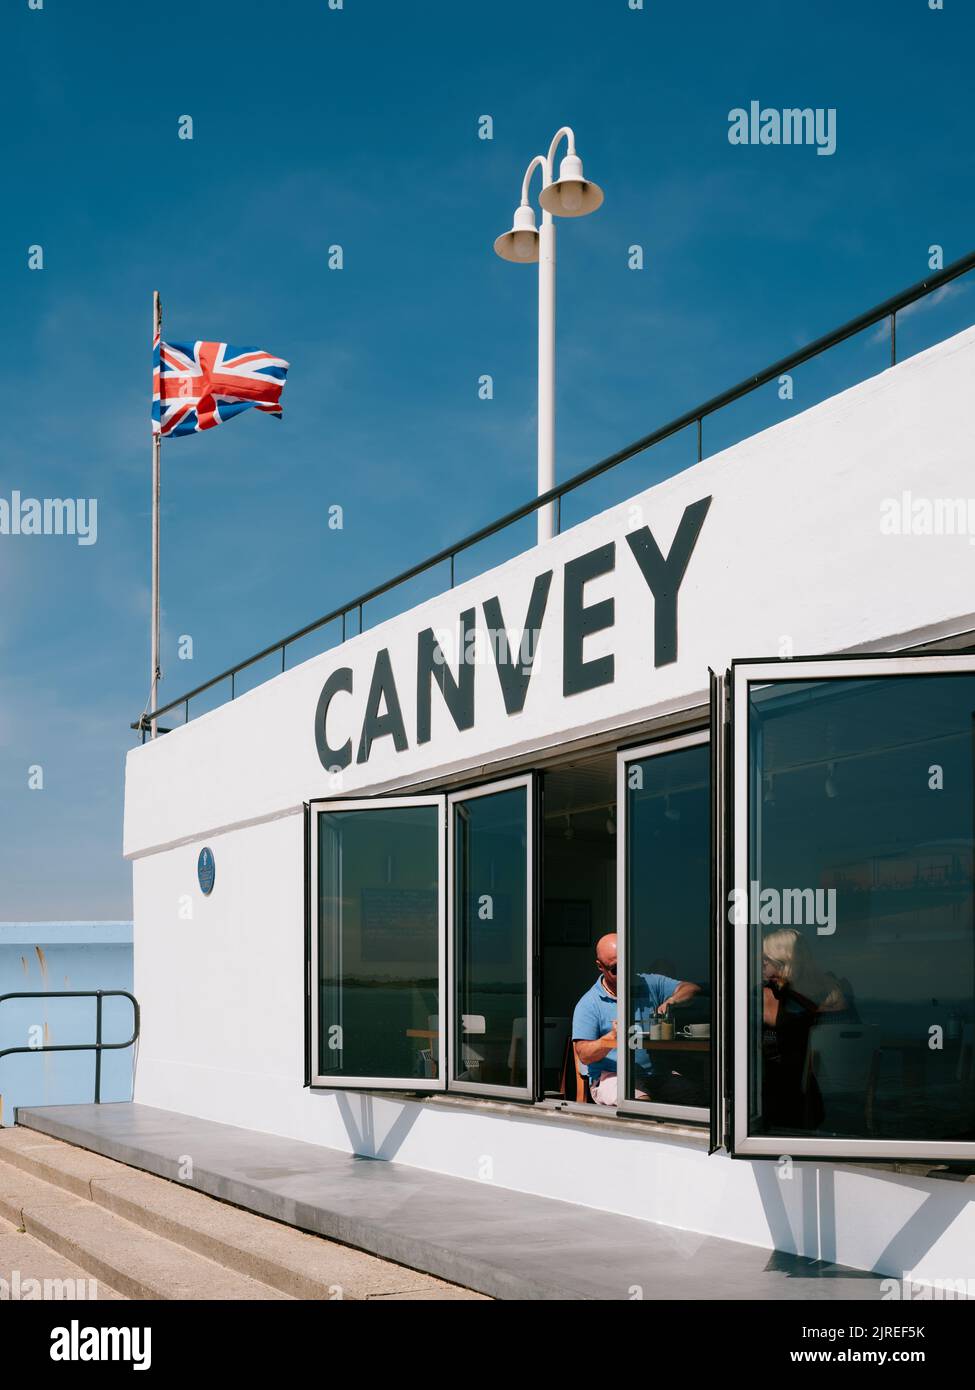 The modernist concrete seaside architecture of the Labworth Cafe Restaurant in Canvey Island, Thames Estuary, Essex, England, UK - Essex summer life Stock Photo